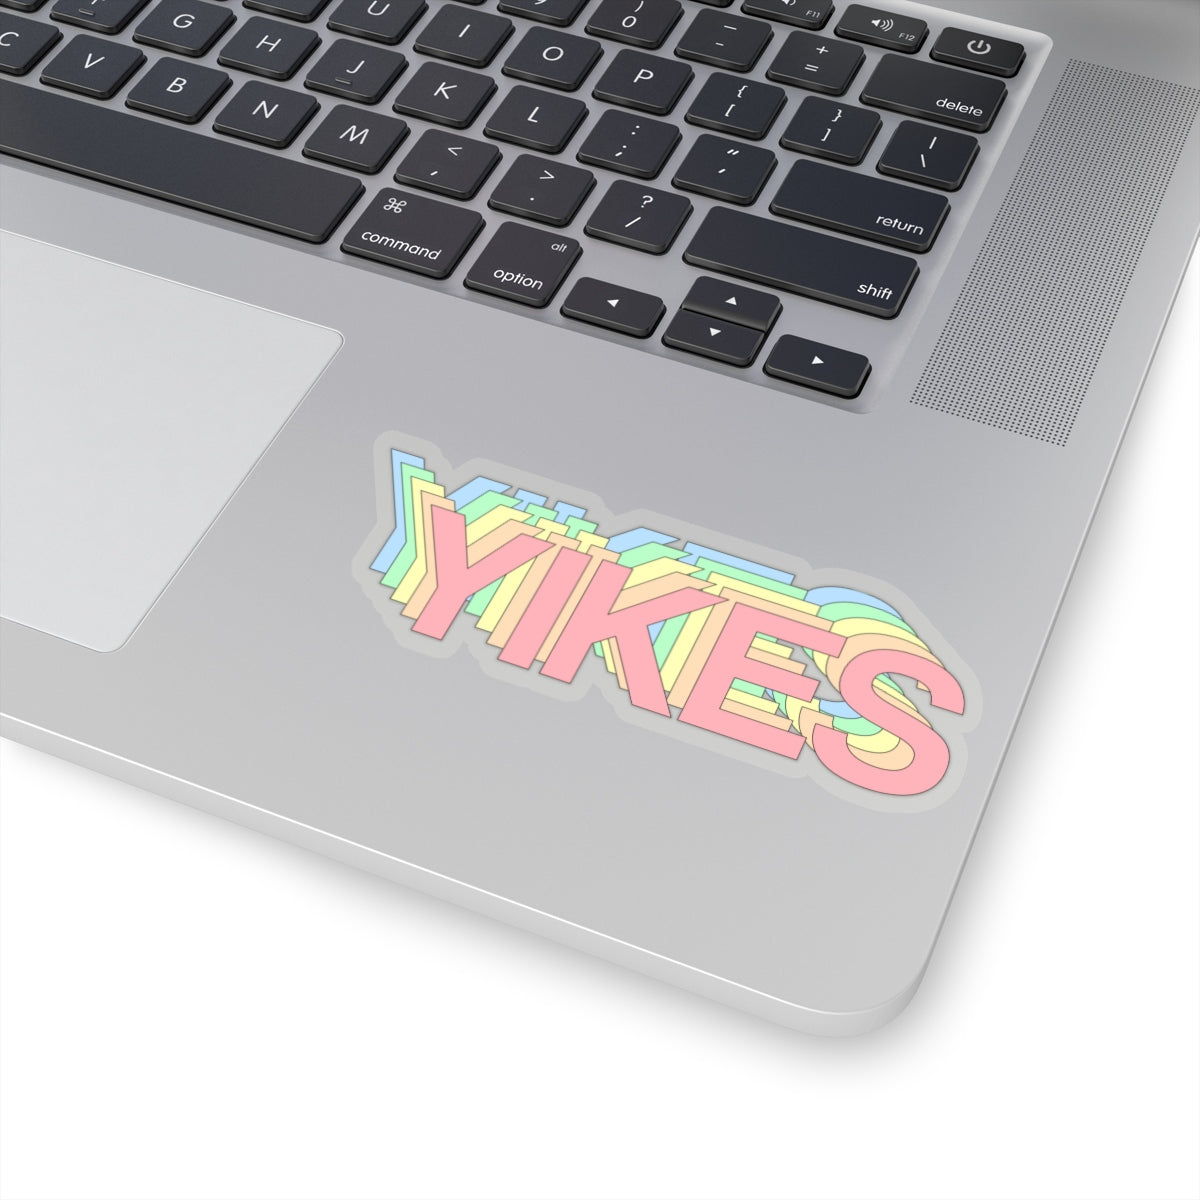 Yikes Stickers, Pastel Rainbow Laptop Vinyl Cute Waterproof for Waterbottle Tumbler Car Bumper Aesthetic Label Wall Phone Decal Starcove Fashion